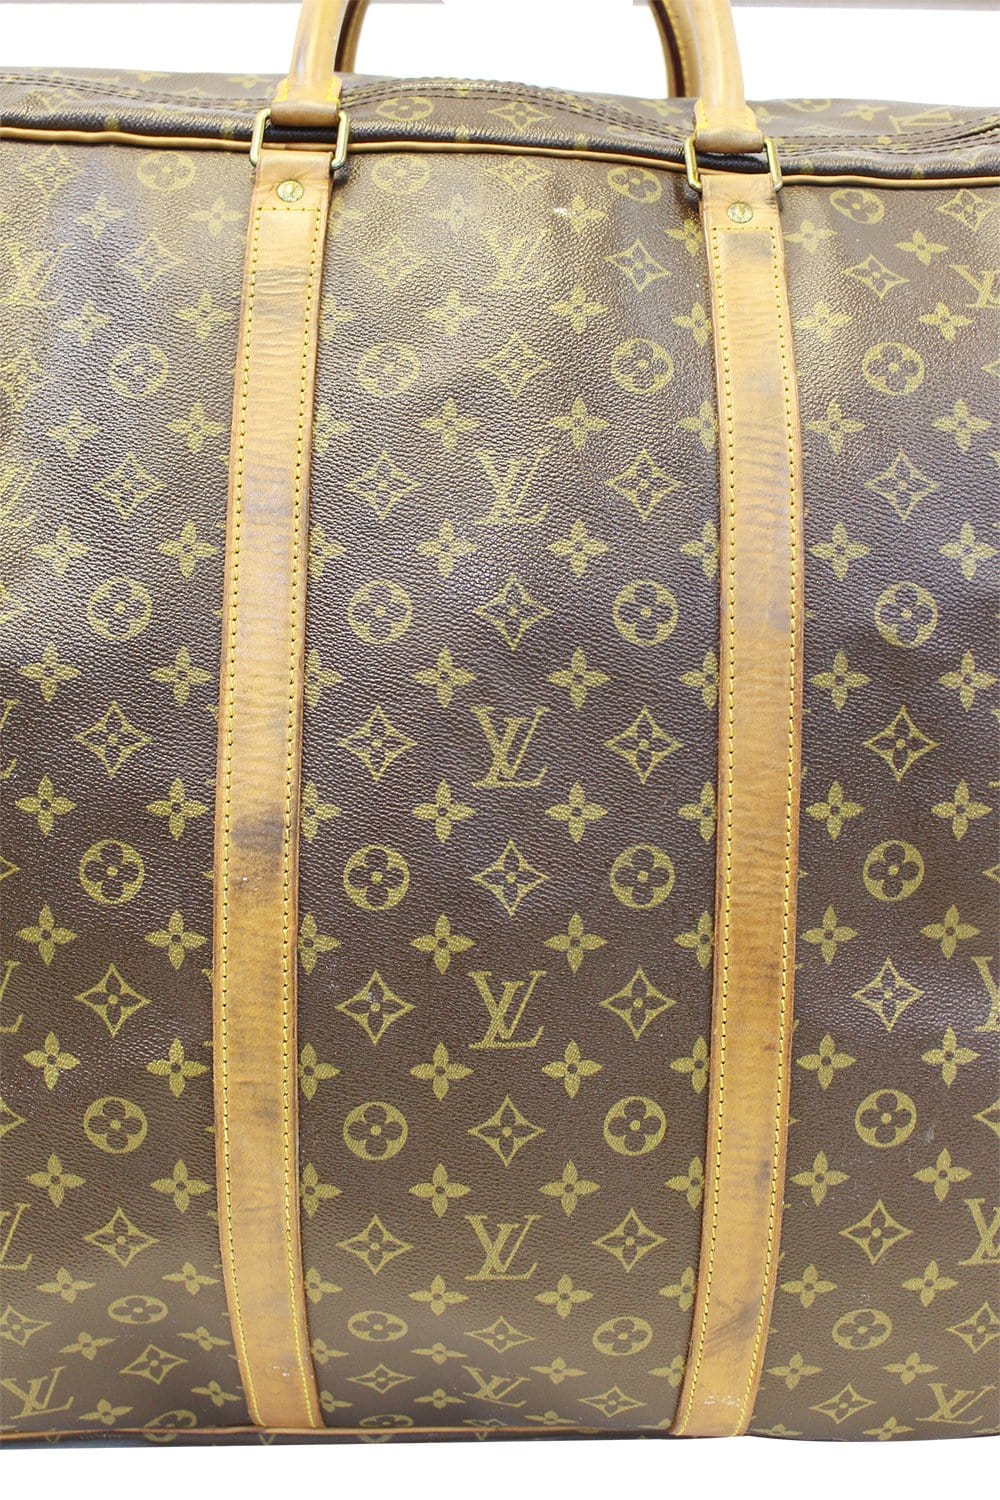 Group Of Seven Louis Vuitton Monogram Canvas Soft And Hard Case Luggage